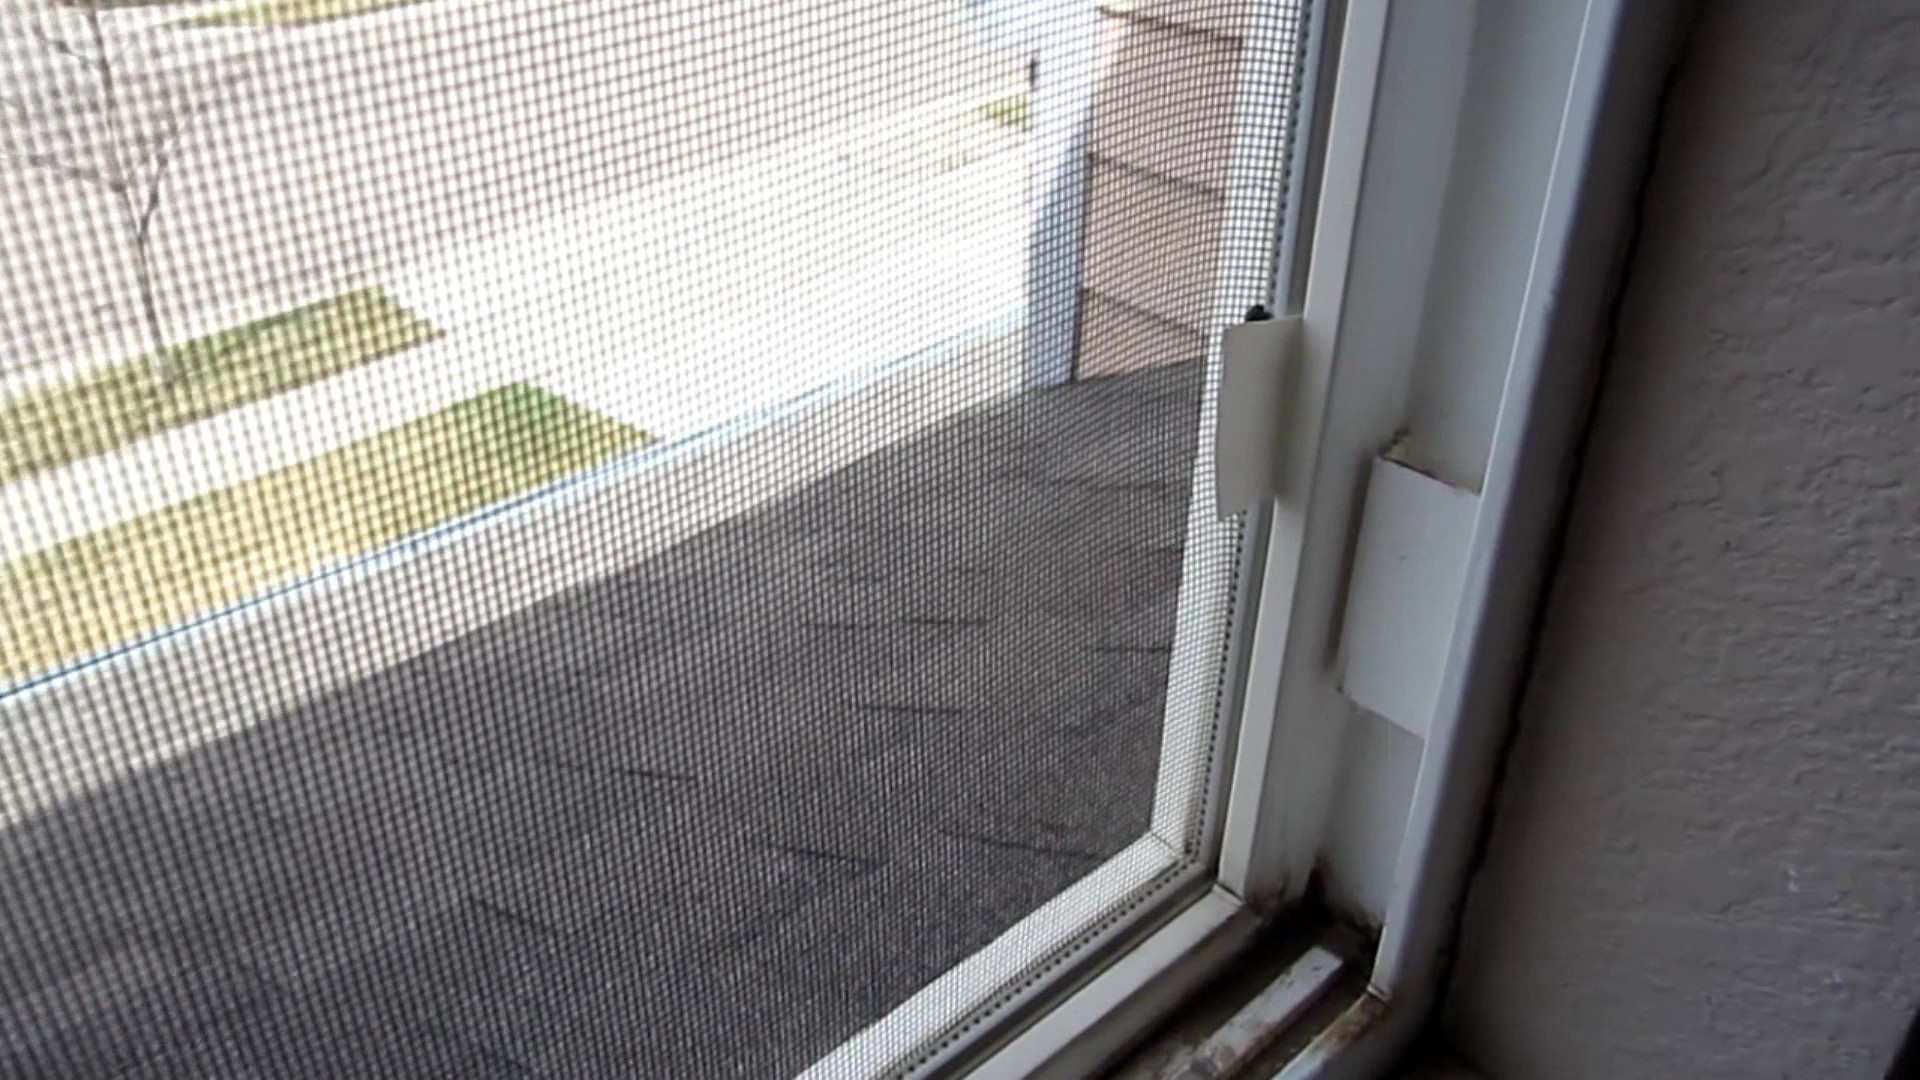 How to Remove a Screen from a Window?